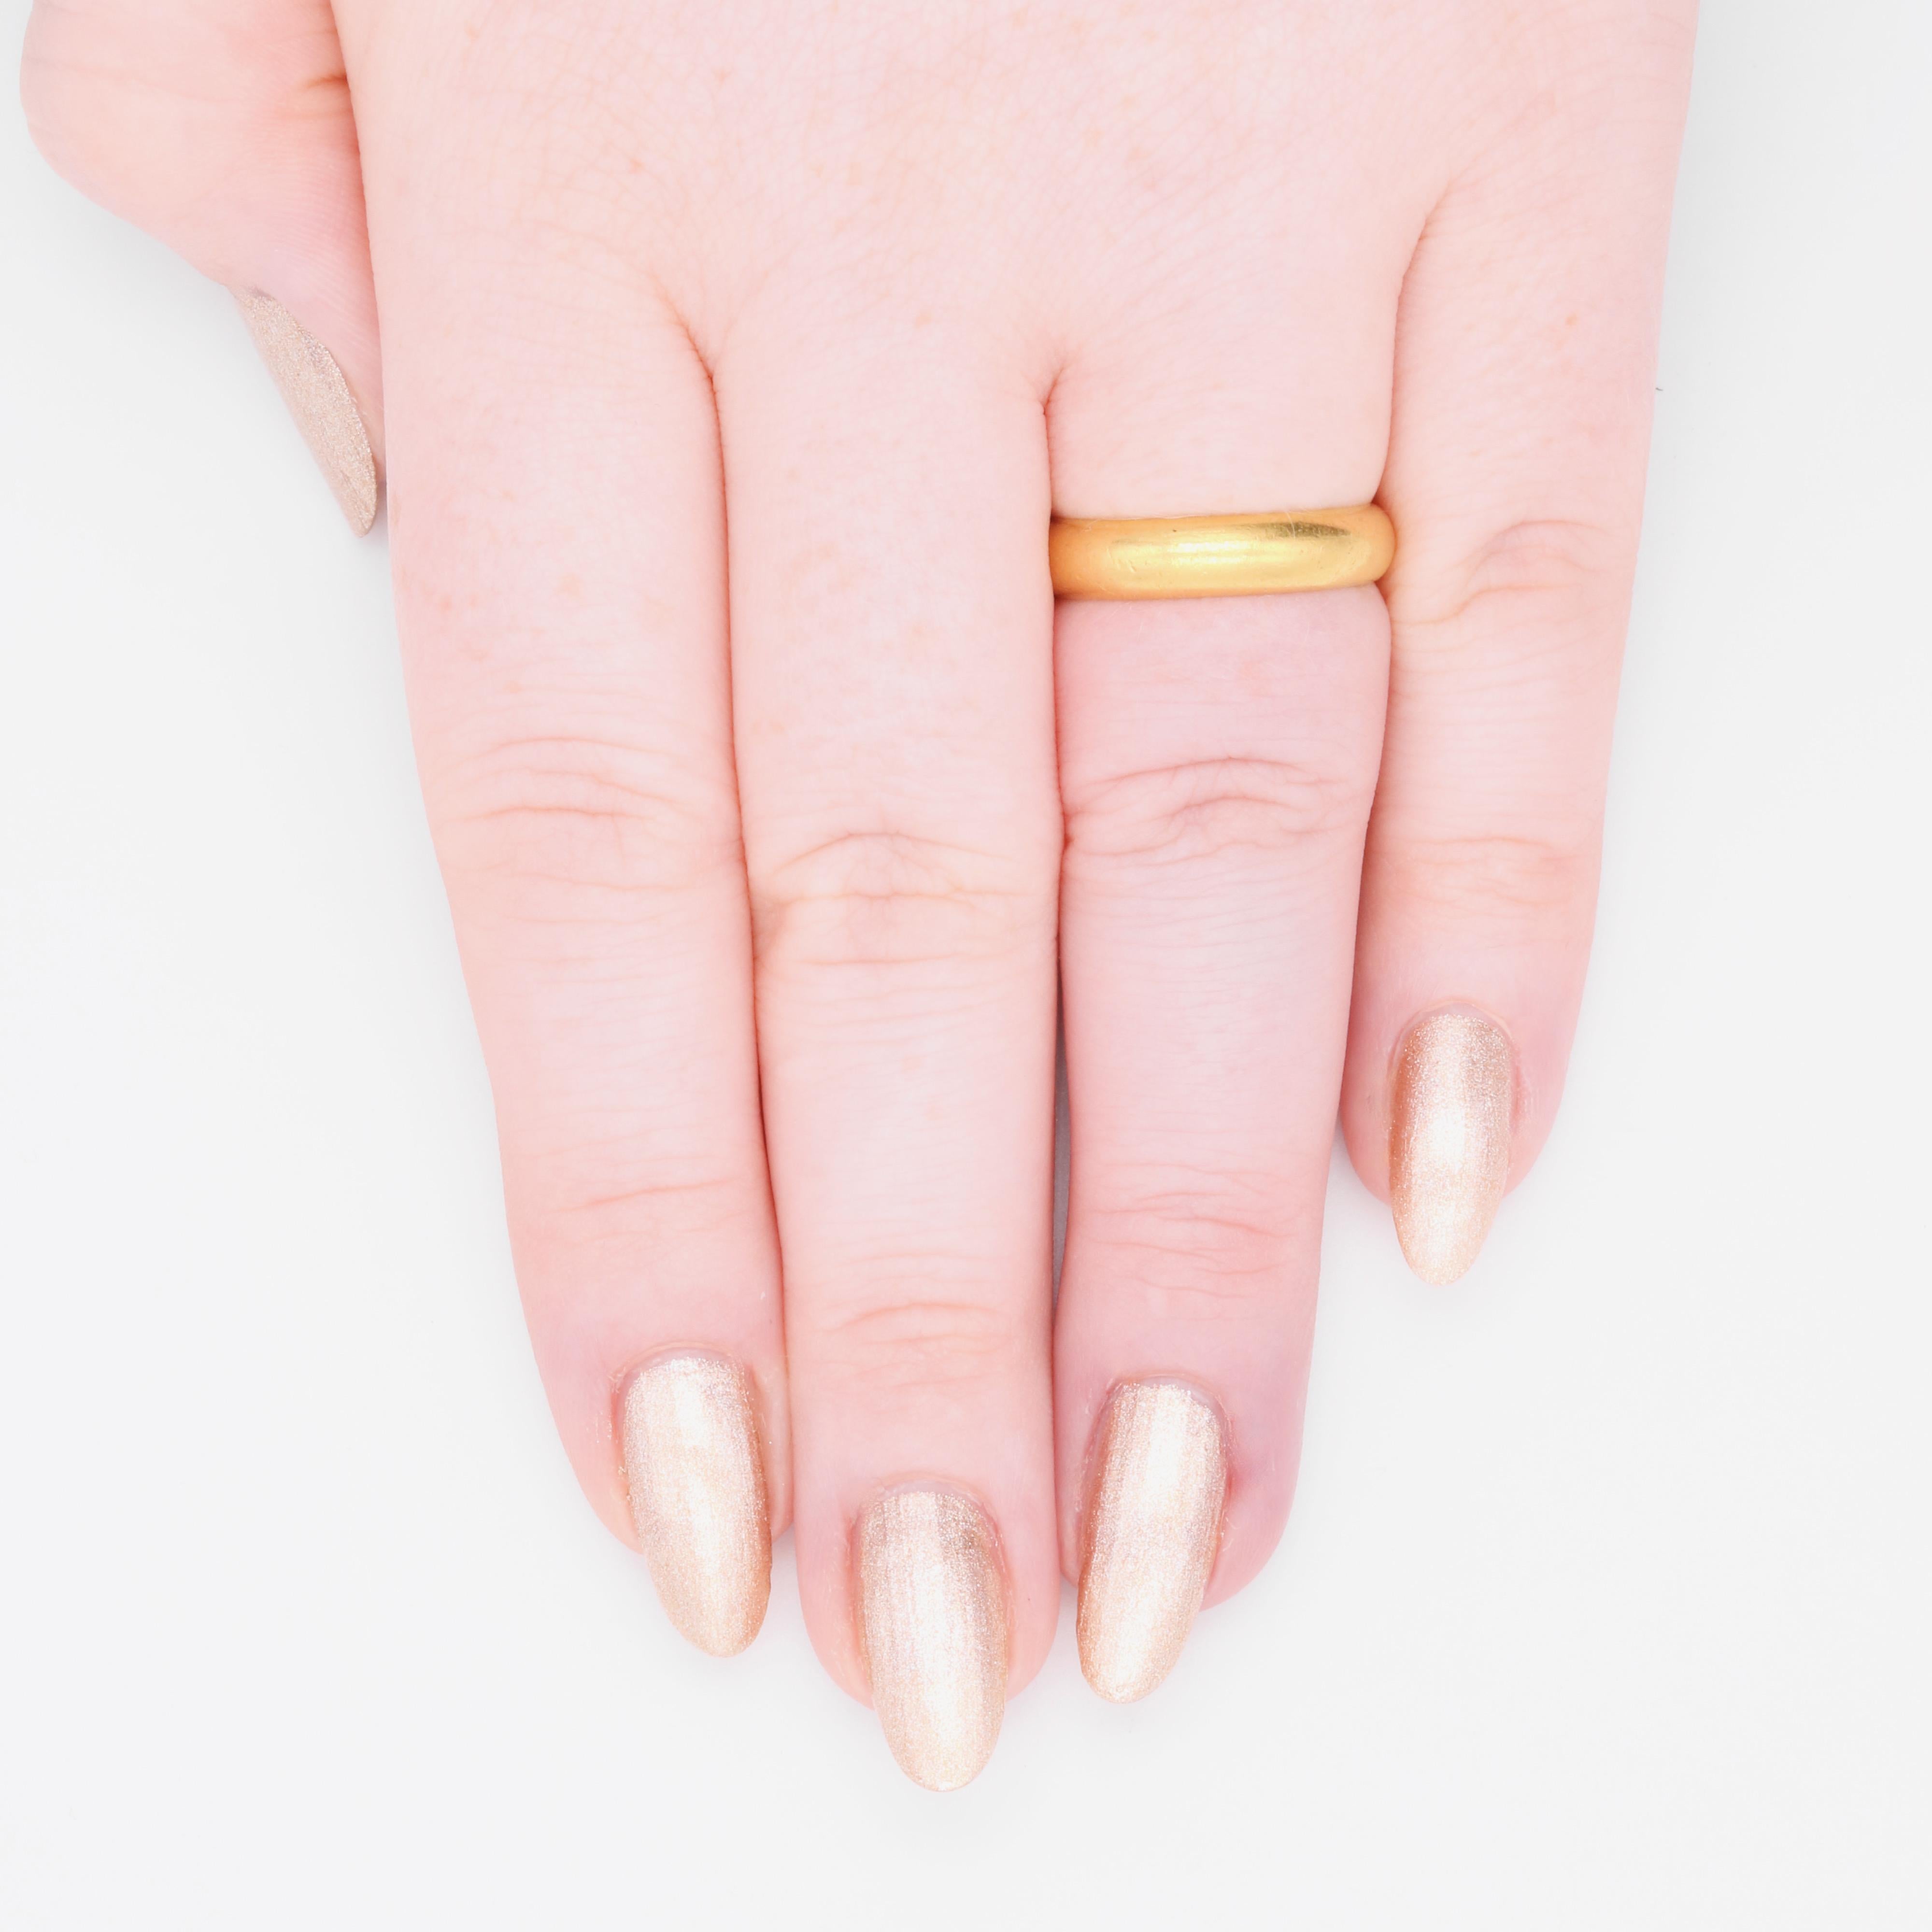 A gold ring, with inscription on the inside of the band, in 22 karat yellow gold.  

This gorgeous ring is a posy (or poesy) ring, deriving its name from the French ‘poésie’, meaning poem, because of the short messages engraved on the inside of the